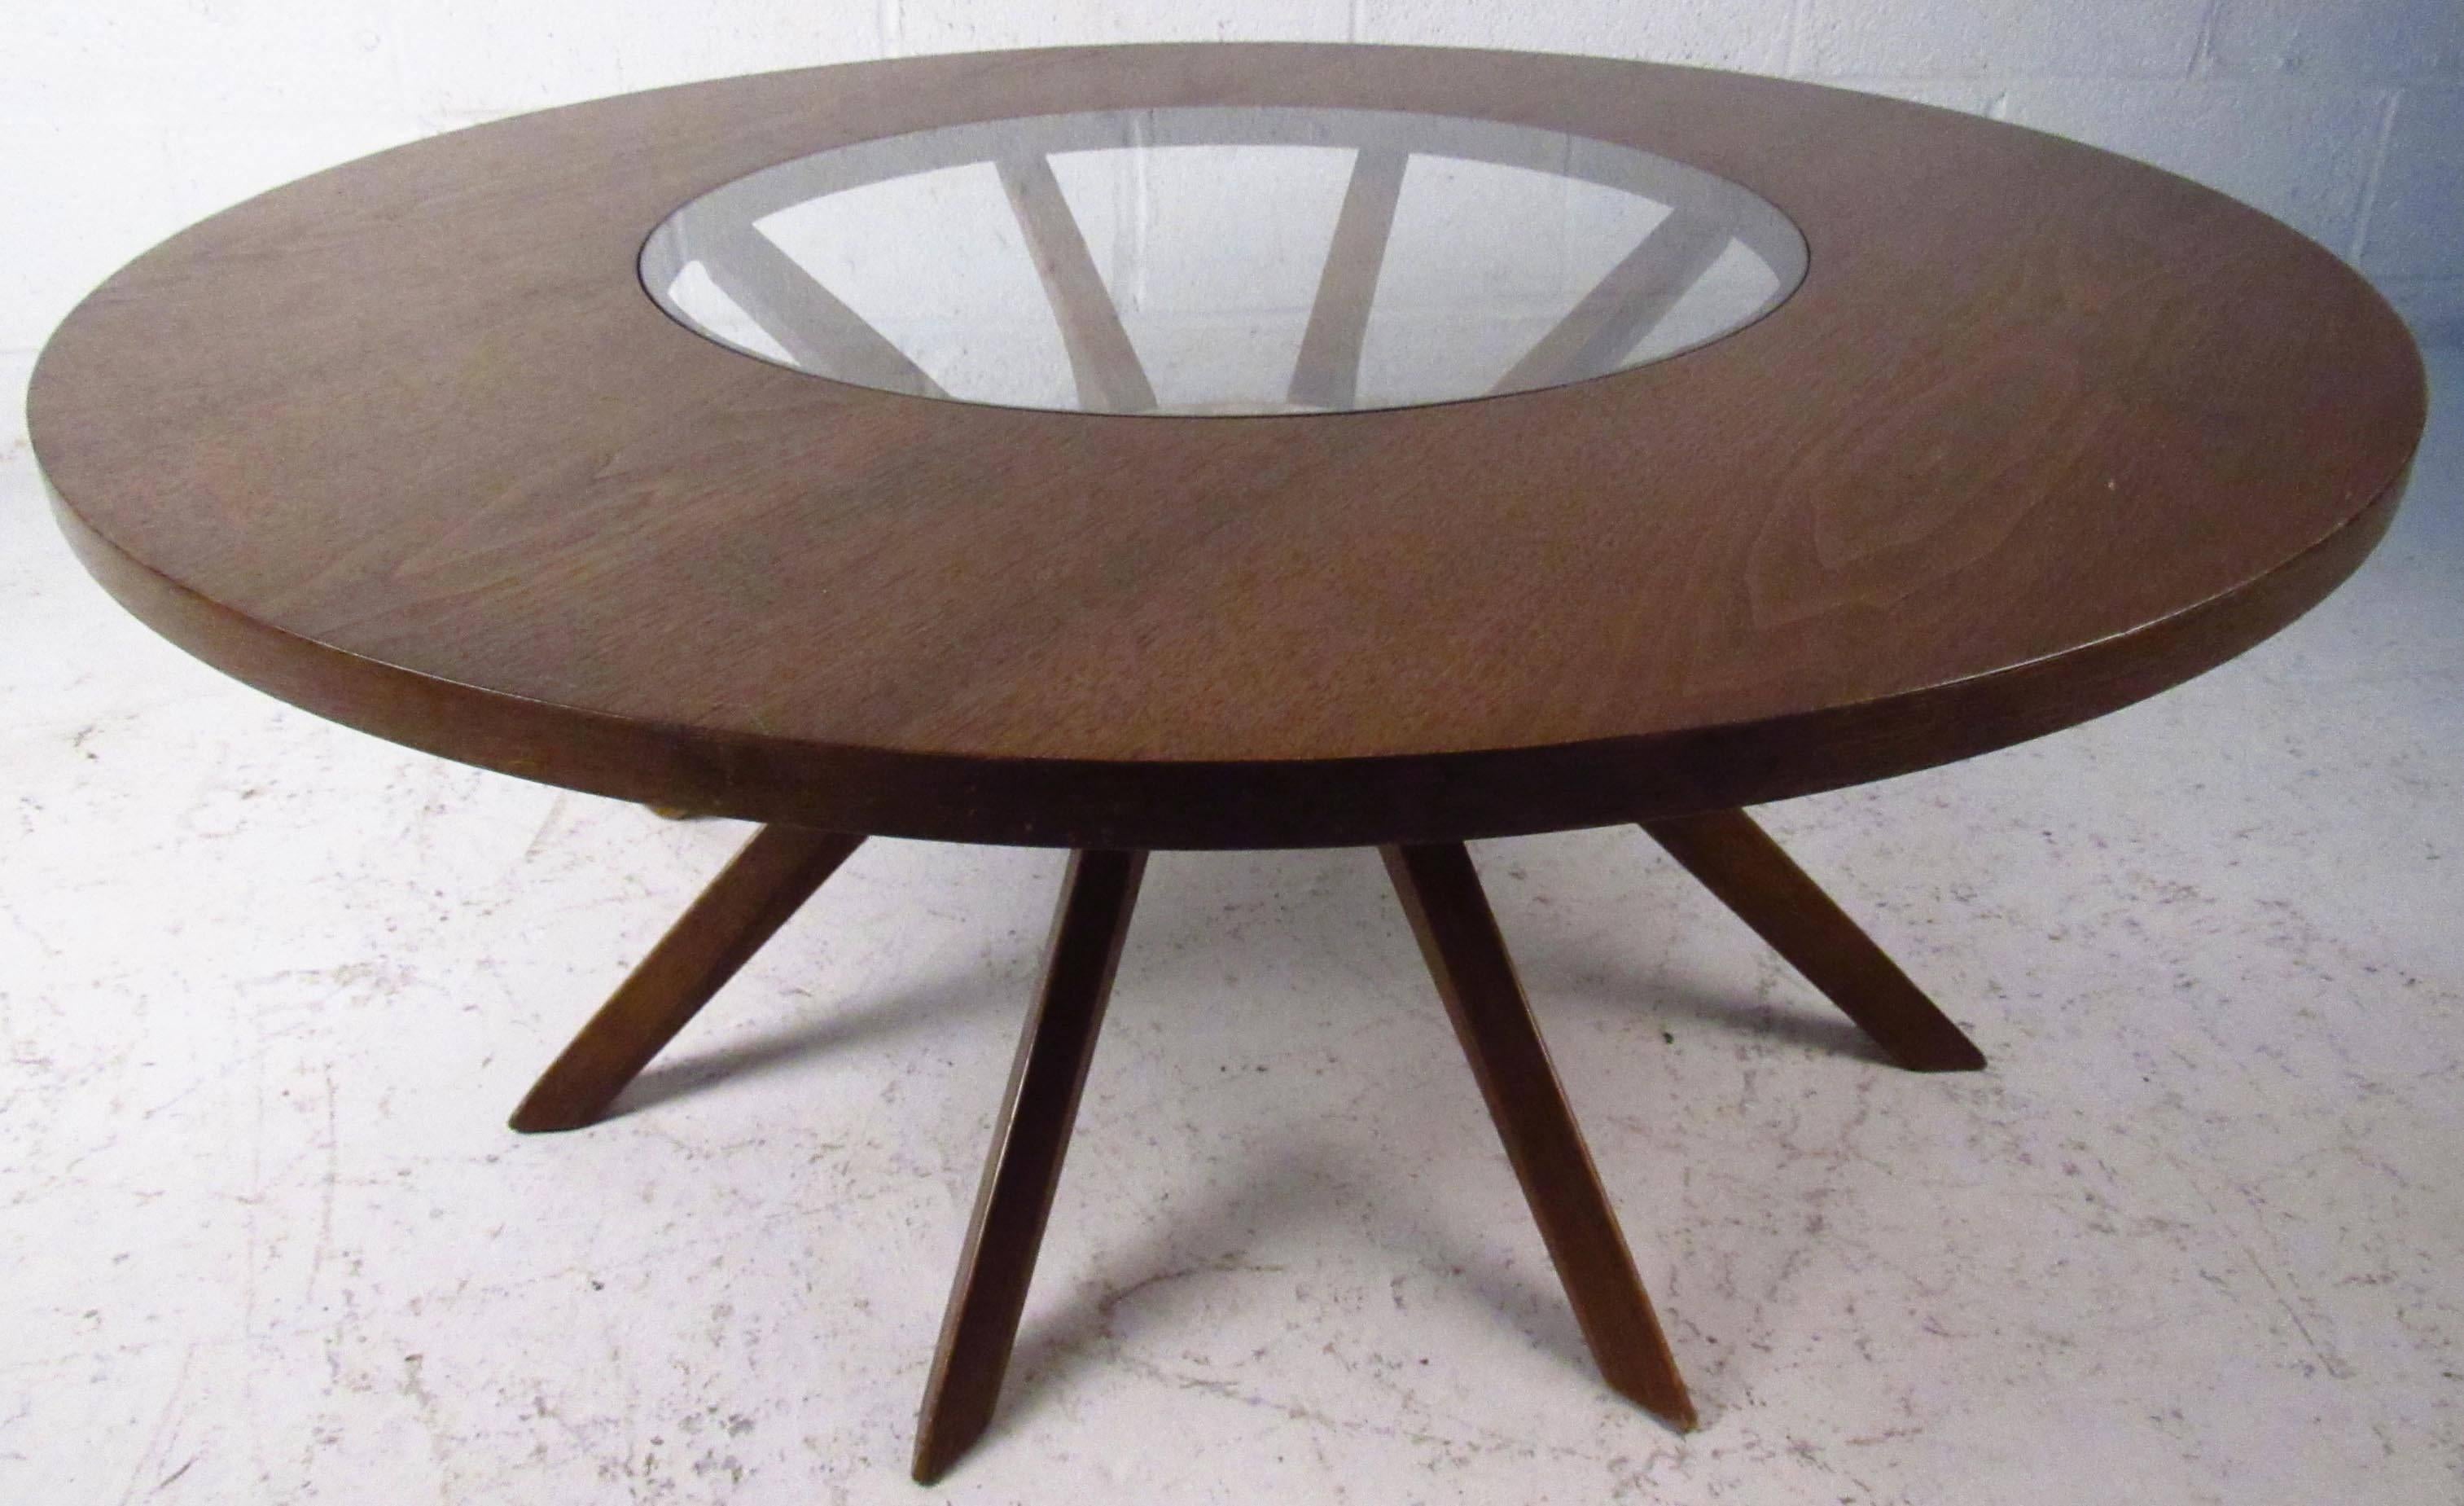 Beautiful vintage coffee table features sculpted legs, round top with glass center, manufactured by Broyhill. 
Please confirm item location NY or NJ with dealer.